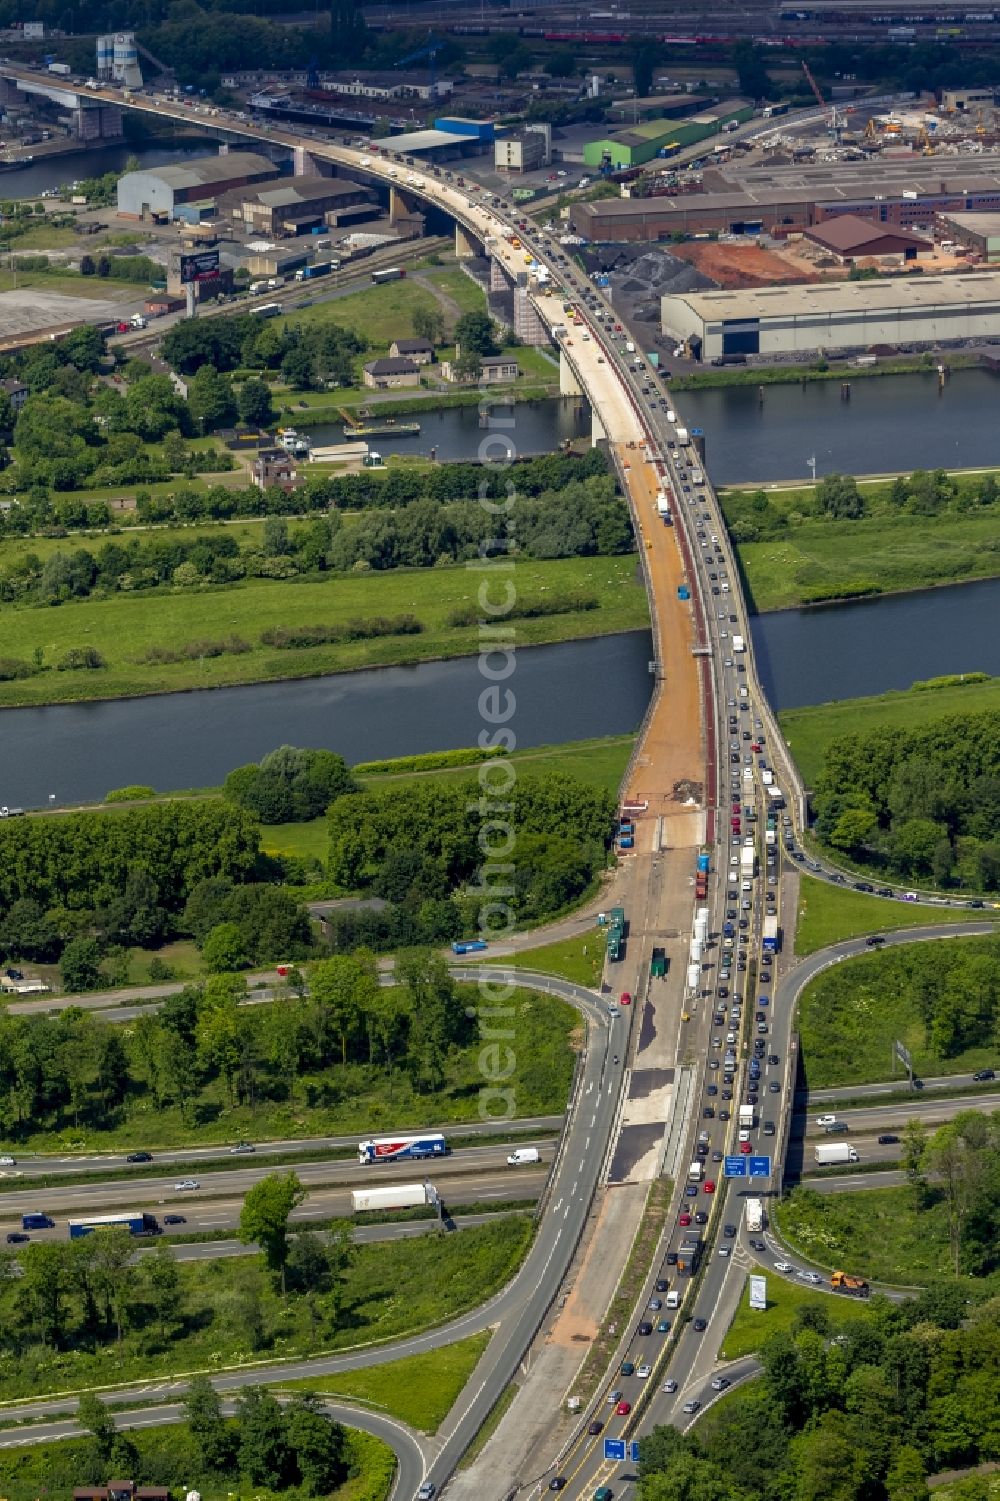 Duisburg from above - Restoration and repair work on the federal highway A59 motorway in the city of Duisburg in North Rhine-Westphalia